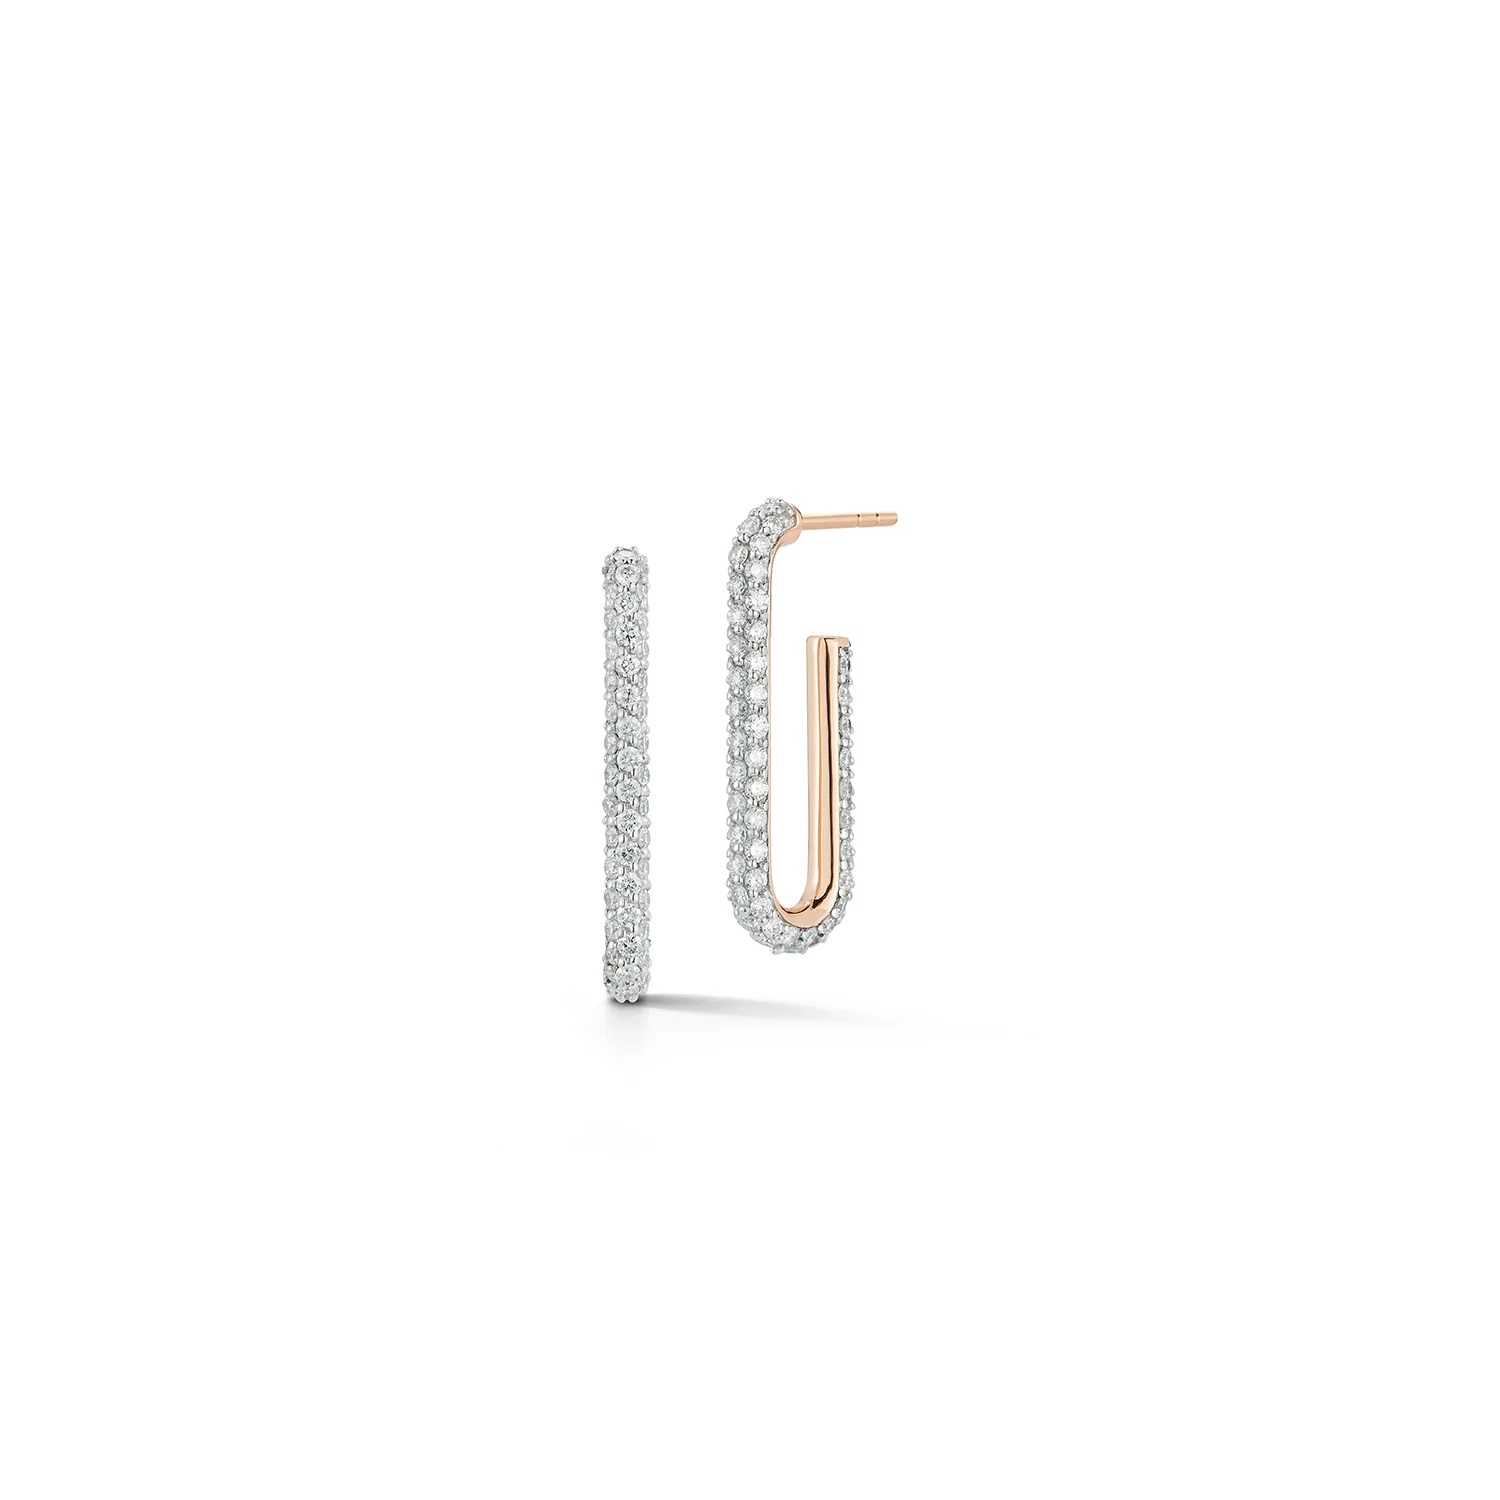 Walter's Faith 18kt Rose Gold Saxon Elongated Chain Link Earrings